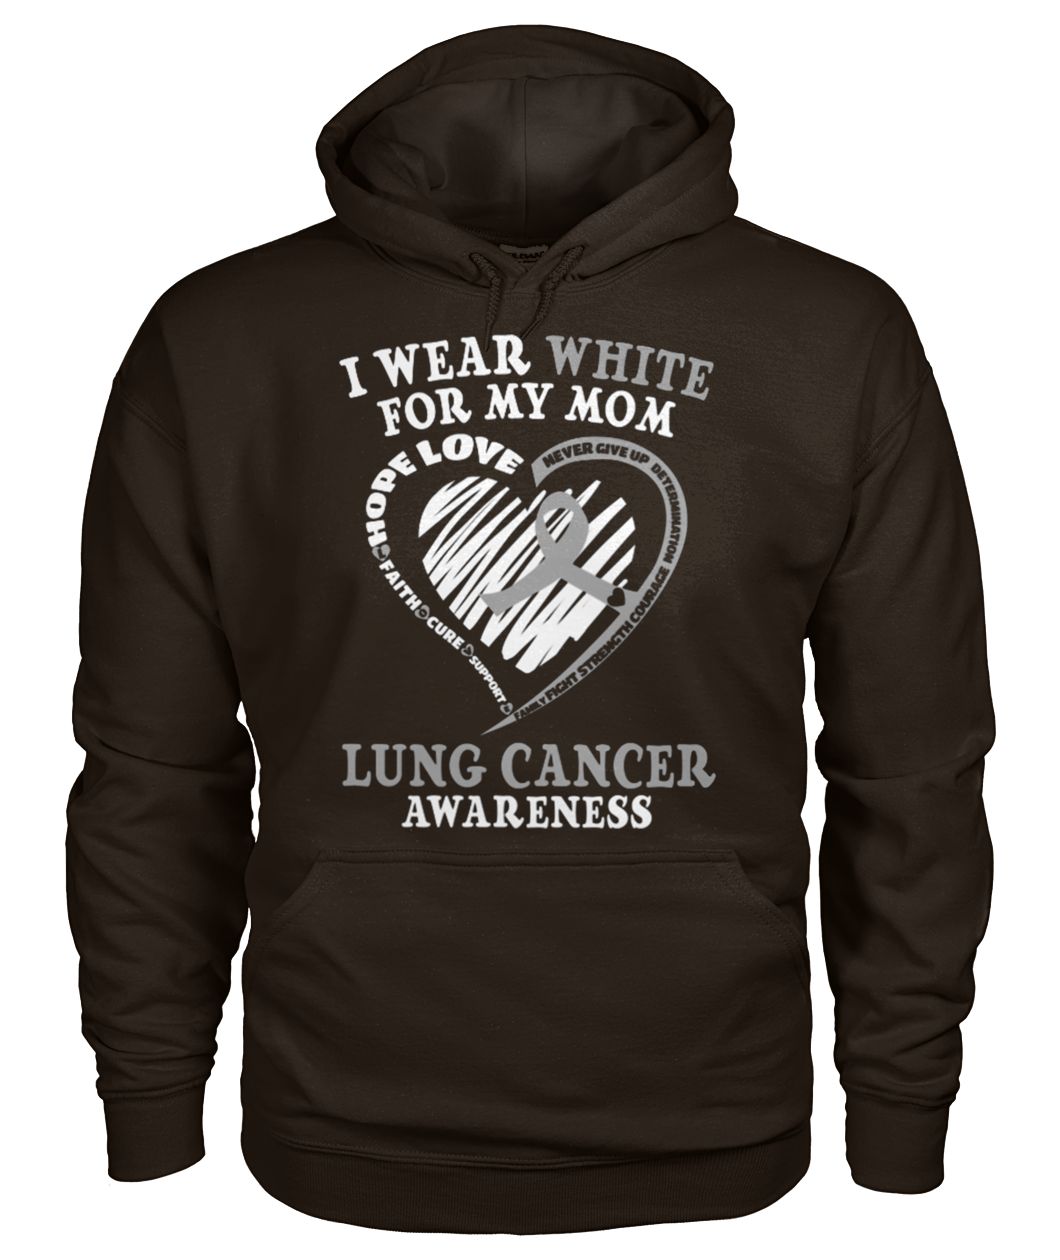 Lung cancer awareness I wear white for my mom gildan hoodie